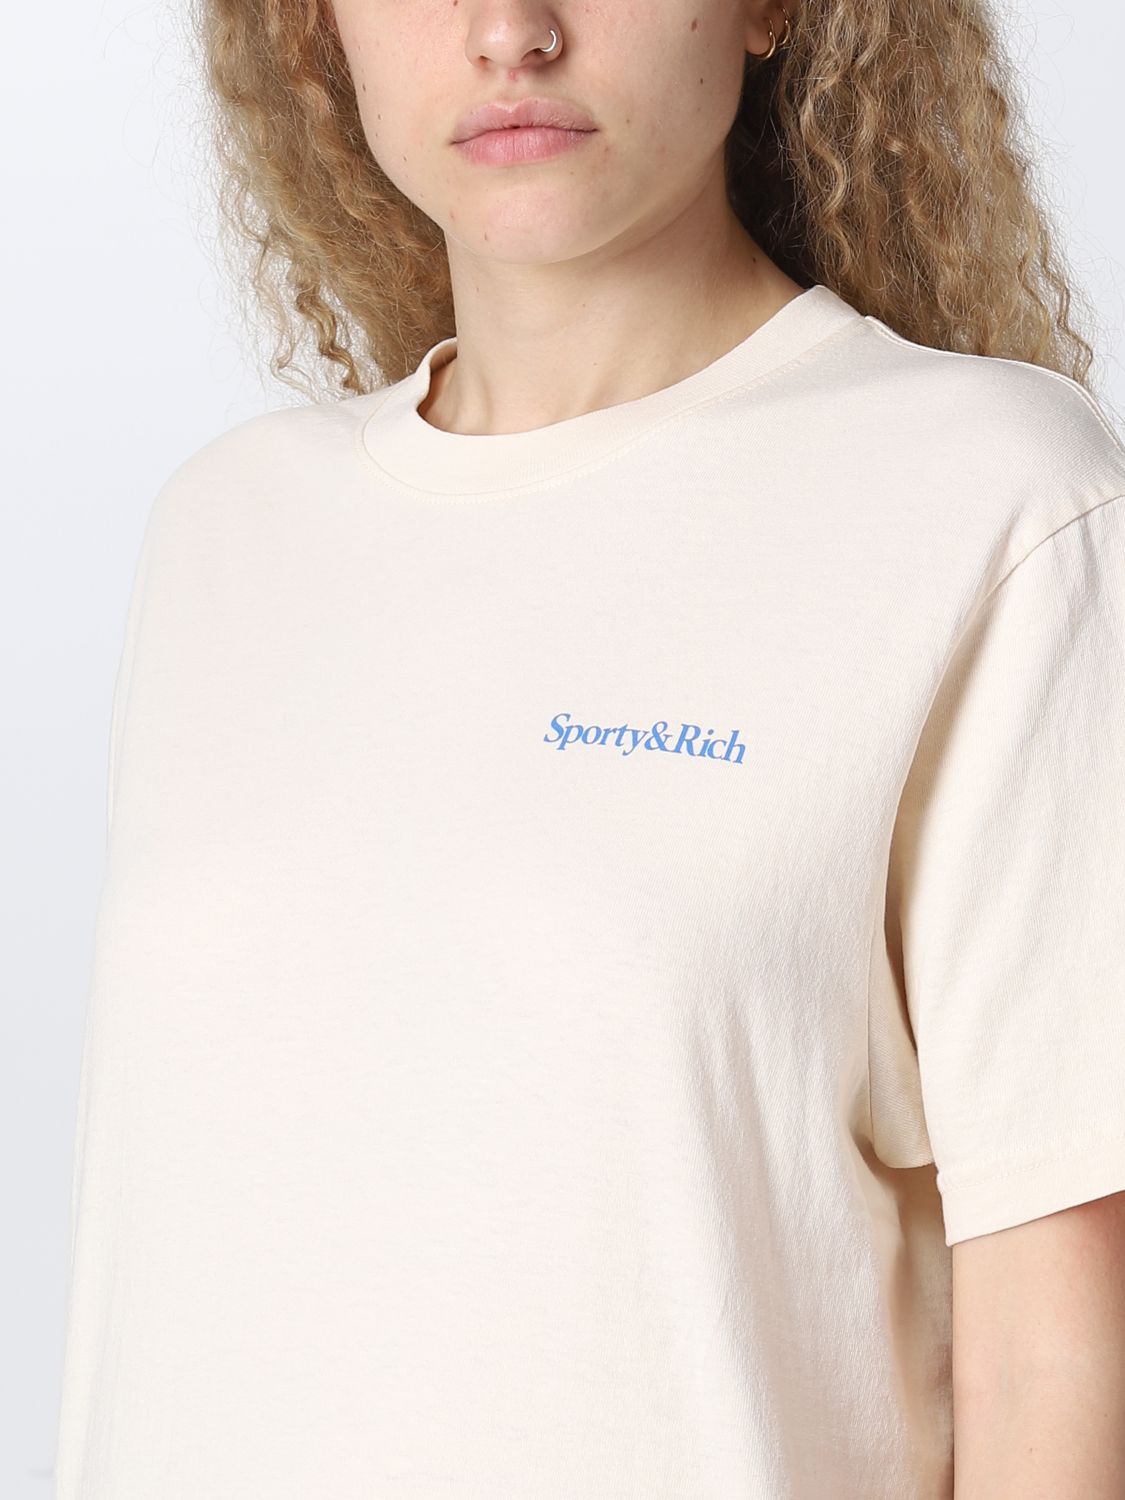 T-shirt Sporty & Rich: T-shirt Sporty & Rich con stampa posteriore crema 3